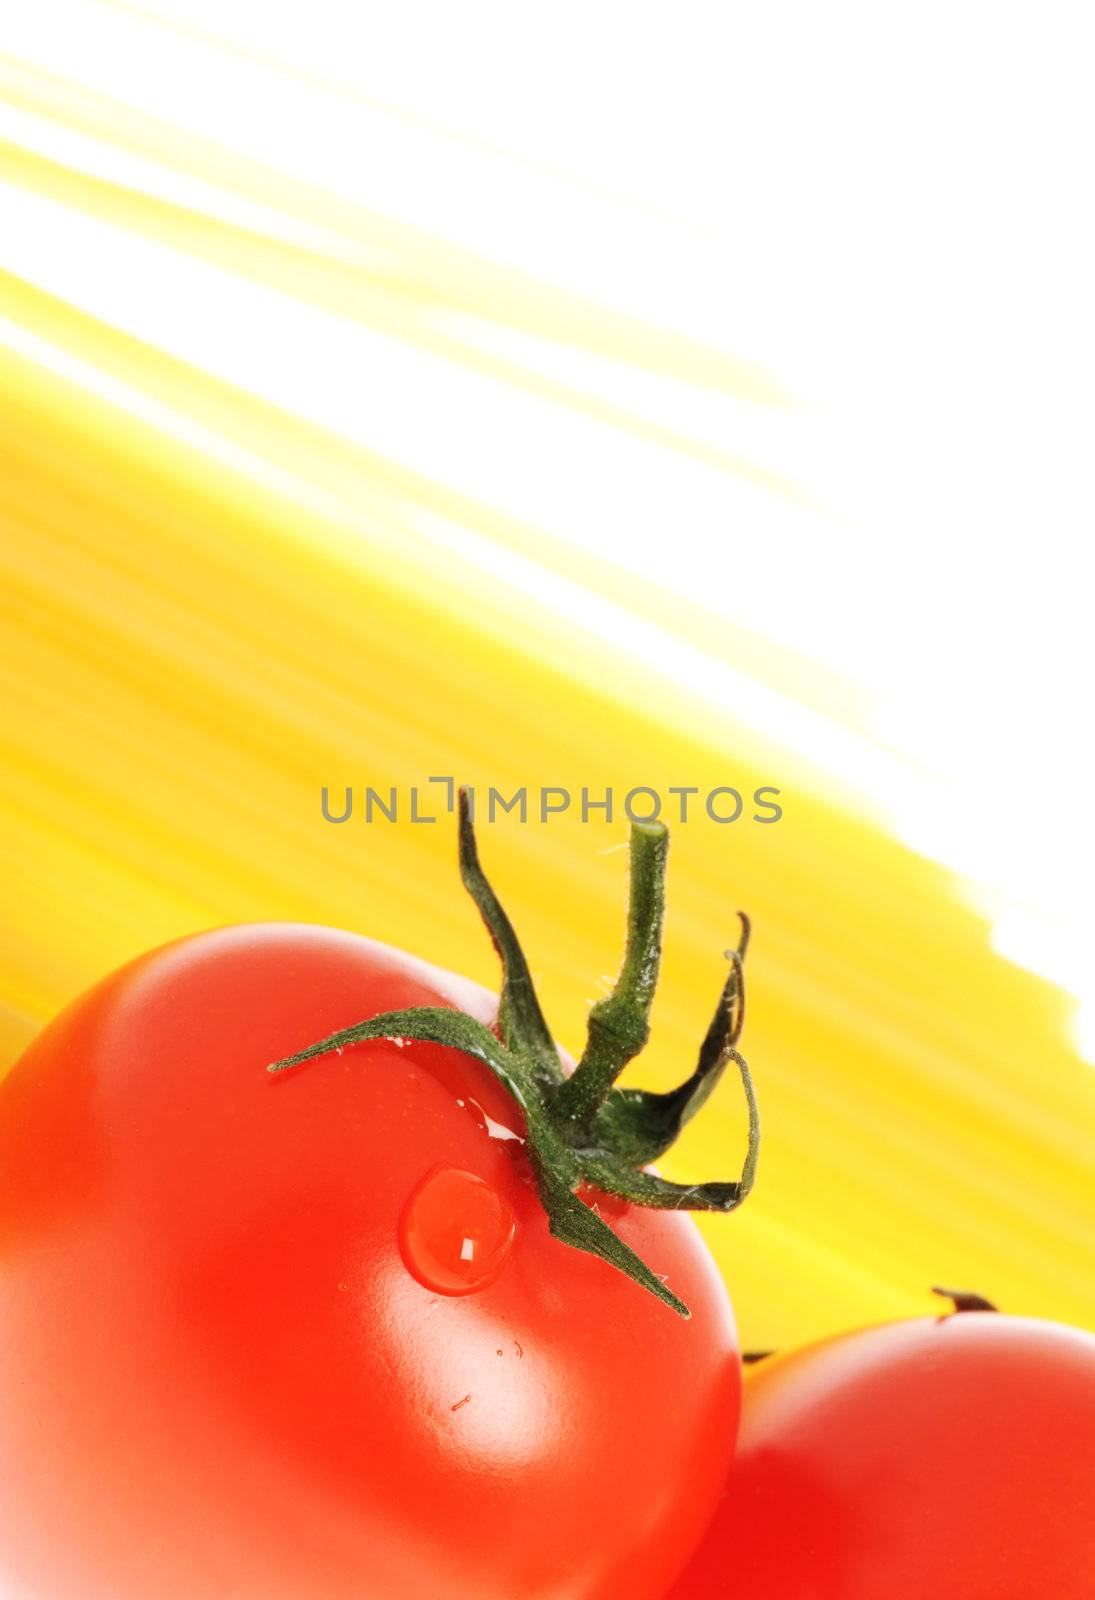 Tomato with drops and uncooked spaghetti noodleson background